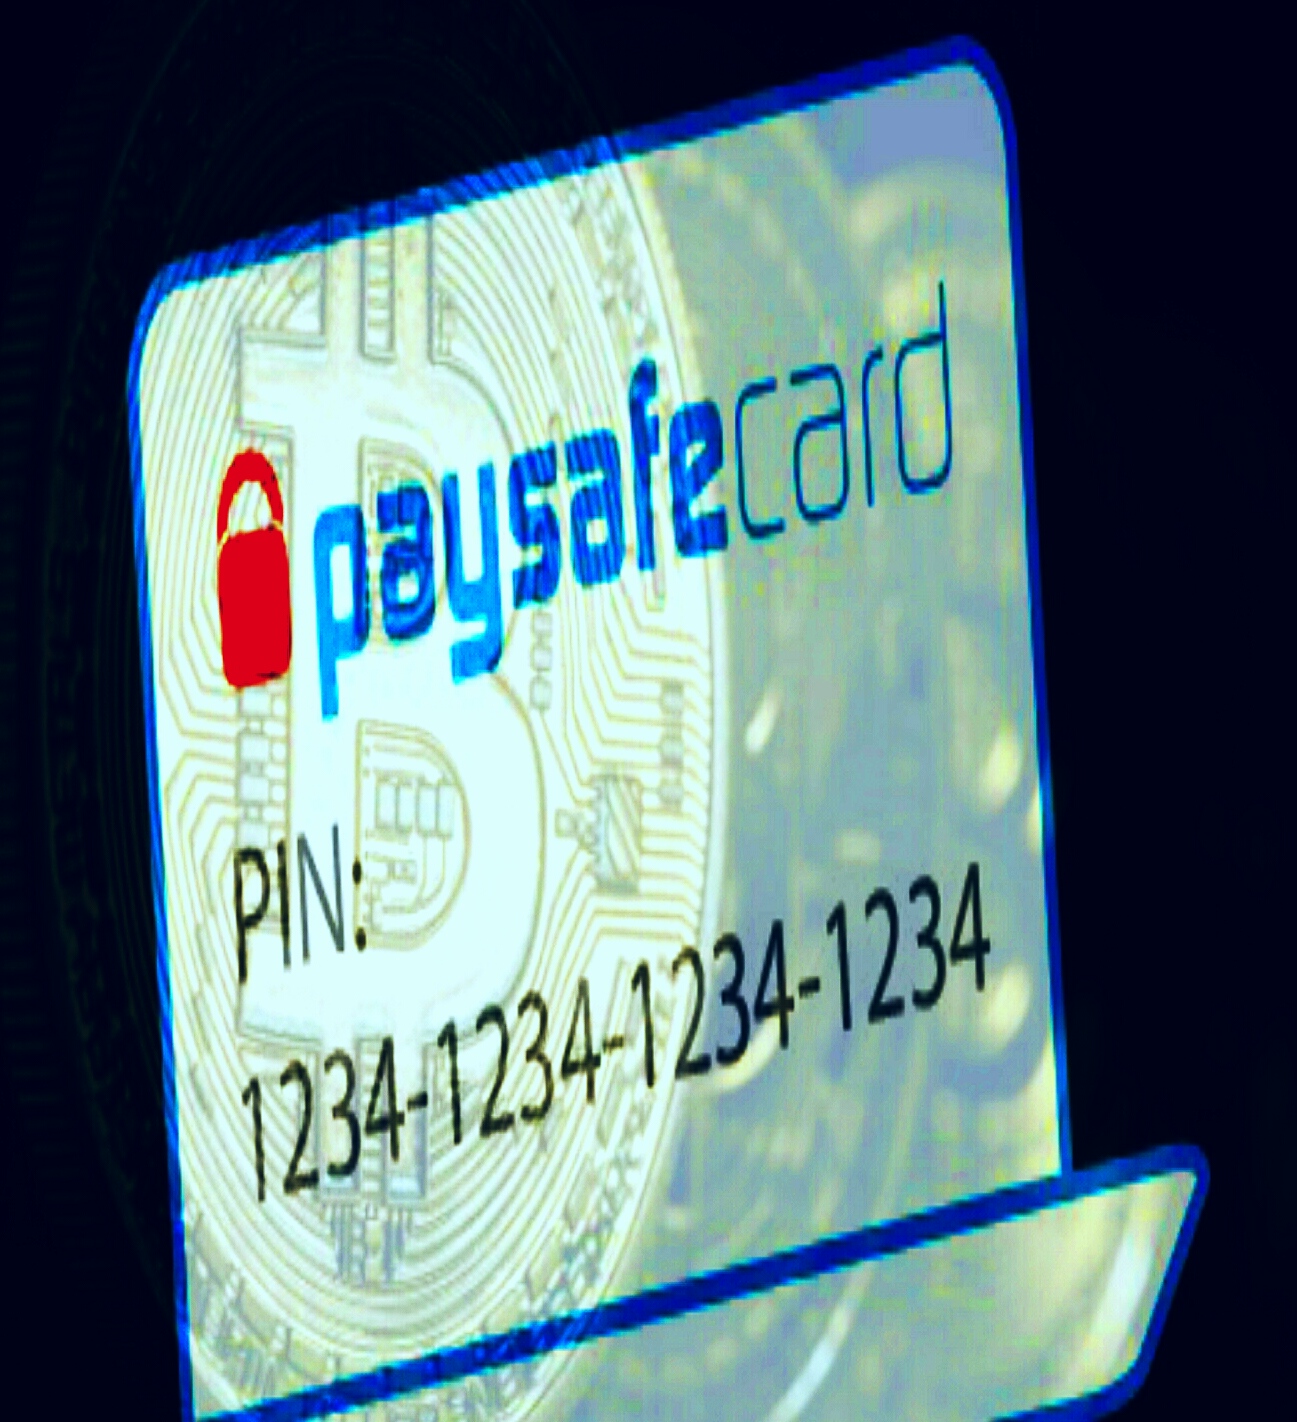 buy crypto with paysafe